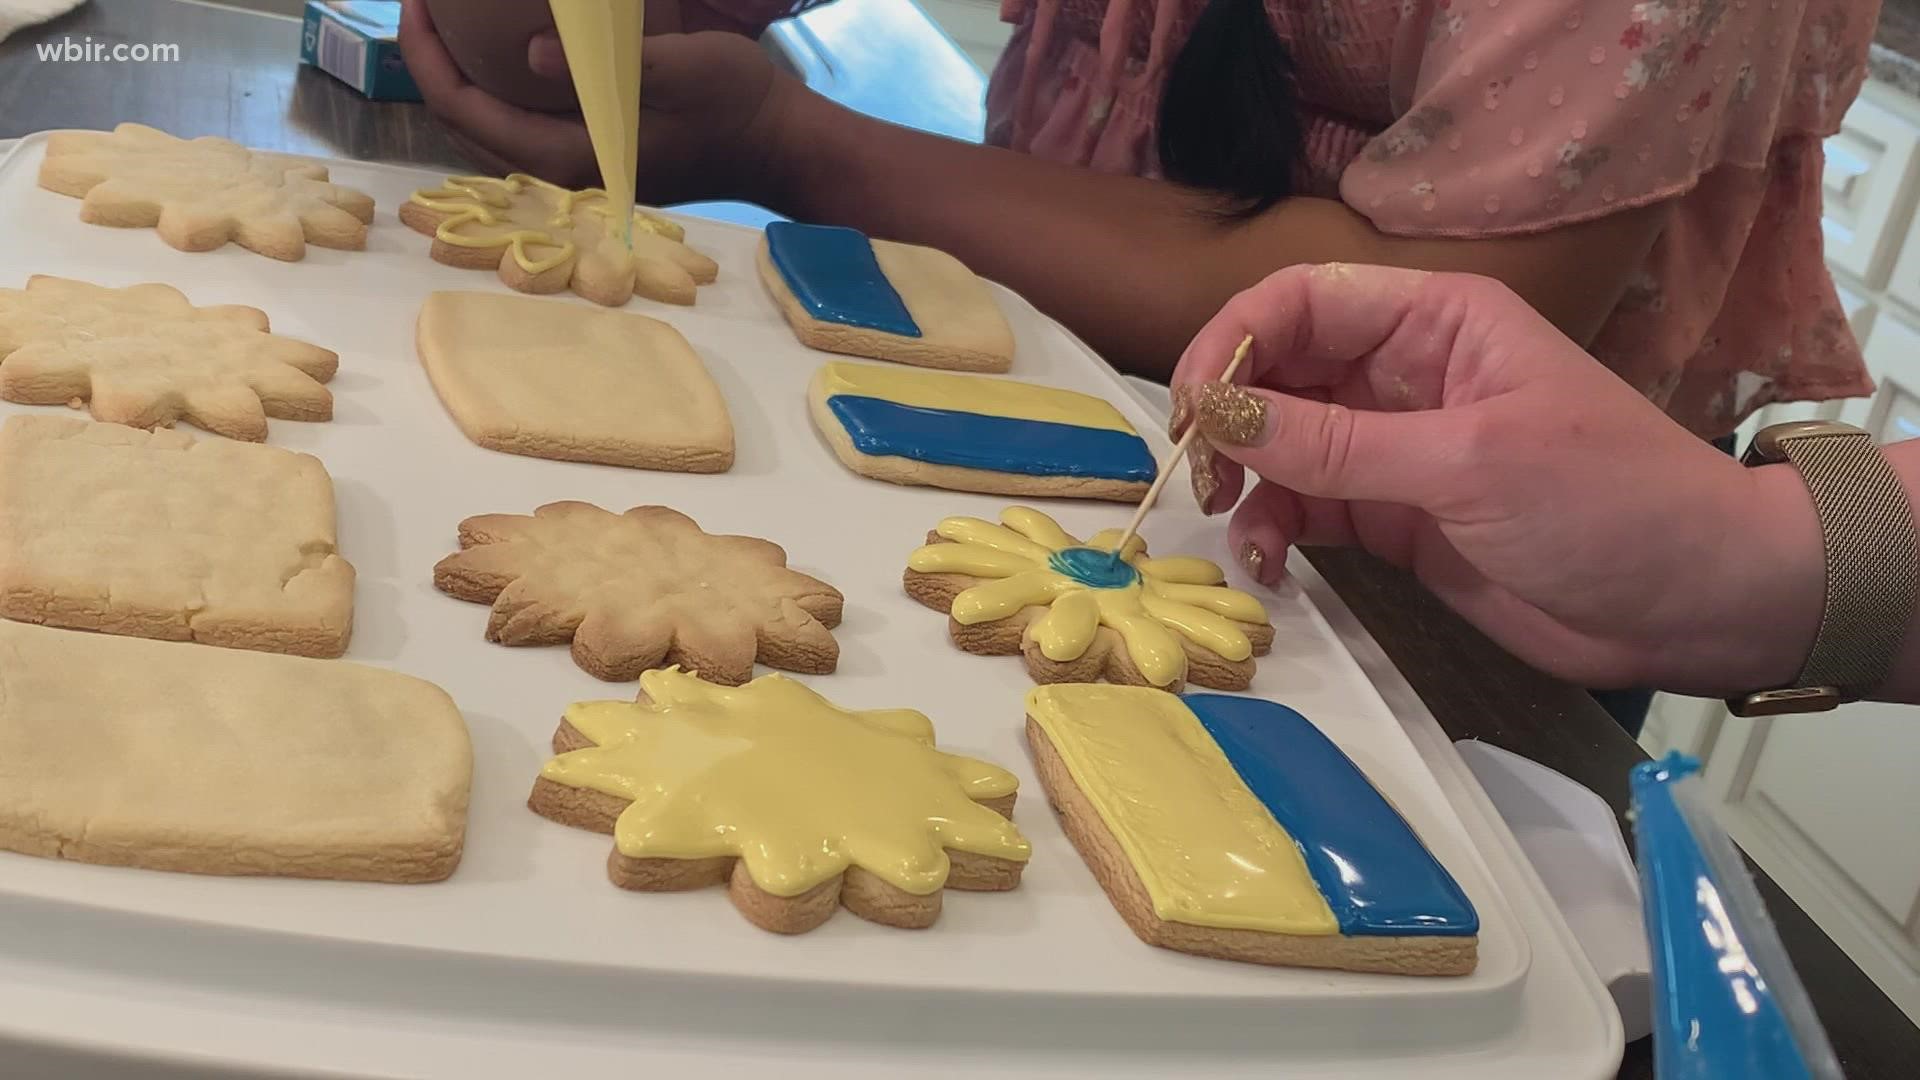 Mimi Johnson, 14, decided to spend her spring break in the kitchen, baking and decorating dozens of cookies to raise money for people in Ukraine.